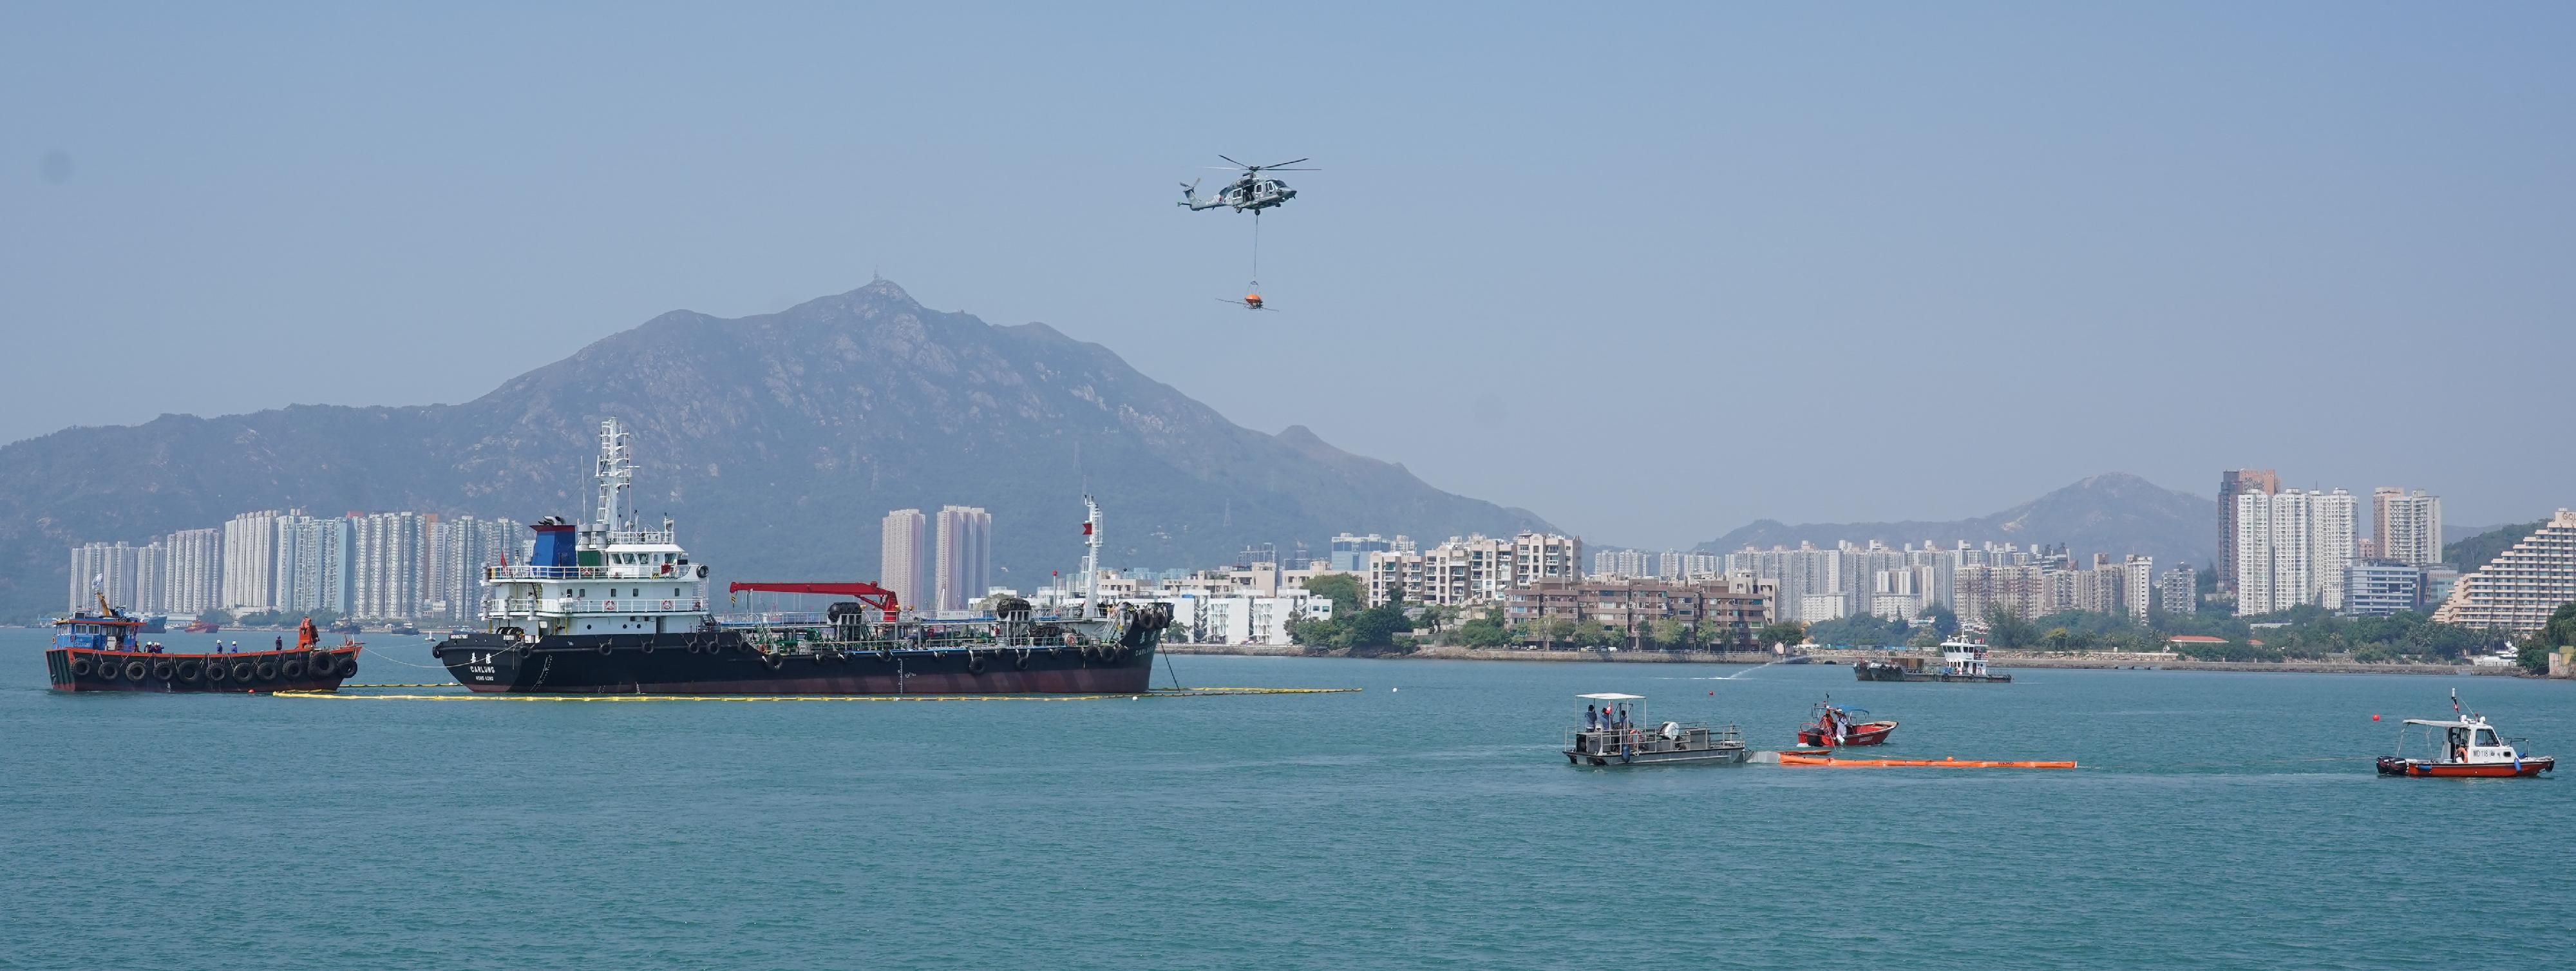 The annual marine pollution joint response exercises, code-named Oilex 2022 and Maritime Hazardous and Noxious Substances (HNS) 2022, were conducted by various government departments this morning (October 28) off Pearl Island, Tuen Mun, to test their marine pollution responses in the event of spillage of oil and HNS in Hong Kong waters. Photo shows an oil spill response team cleaning up the spilled oil on the sea surface. The Government Flying Service and other response groups were also tasked at the scene.